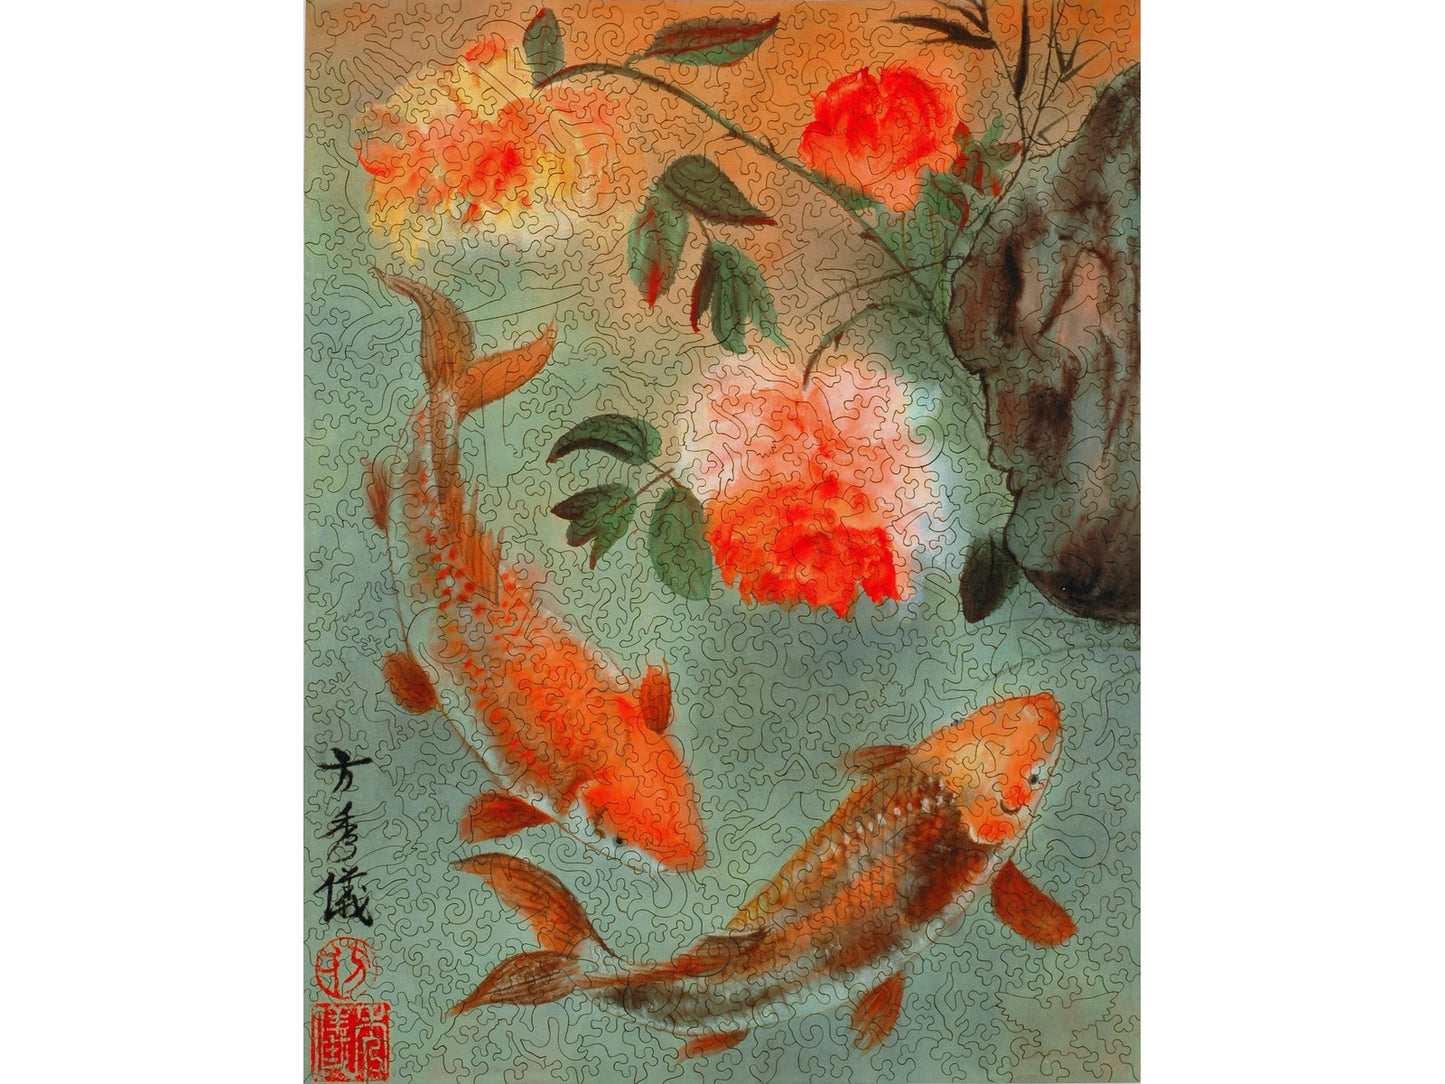 The front of the puzzle, Two Koi, which shows two fish swimming in a pond surrounded by flowers.